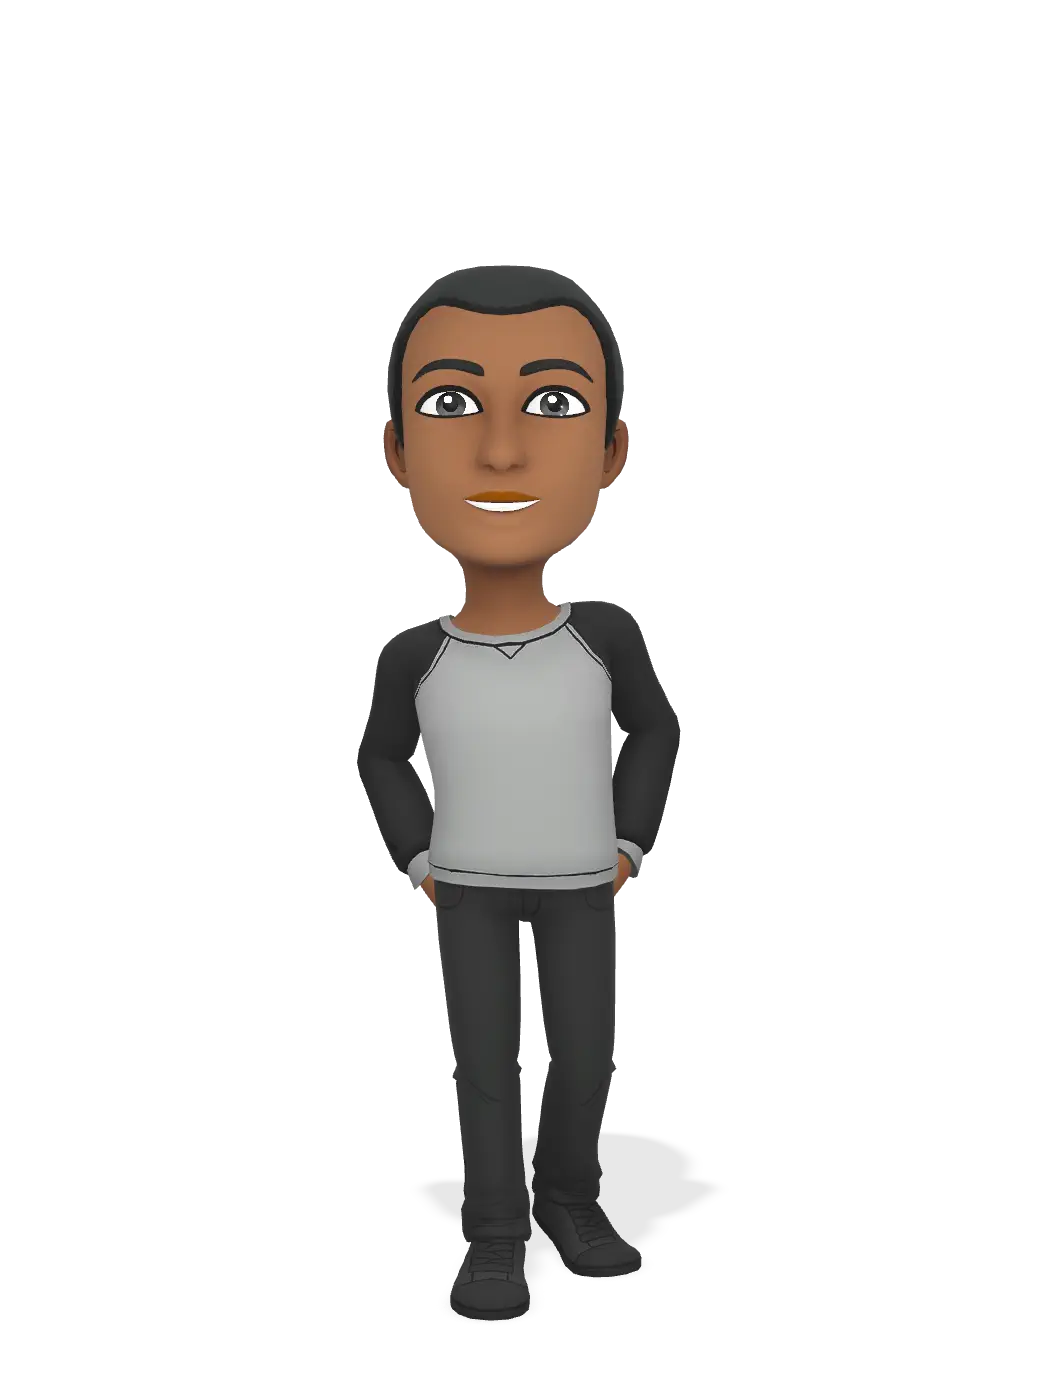 3D Bitmoji for onpointbball